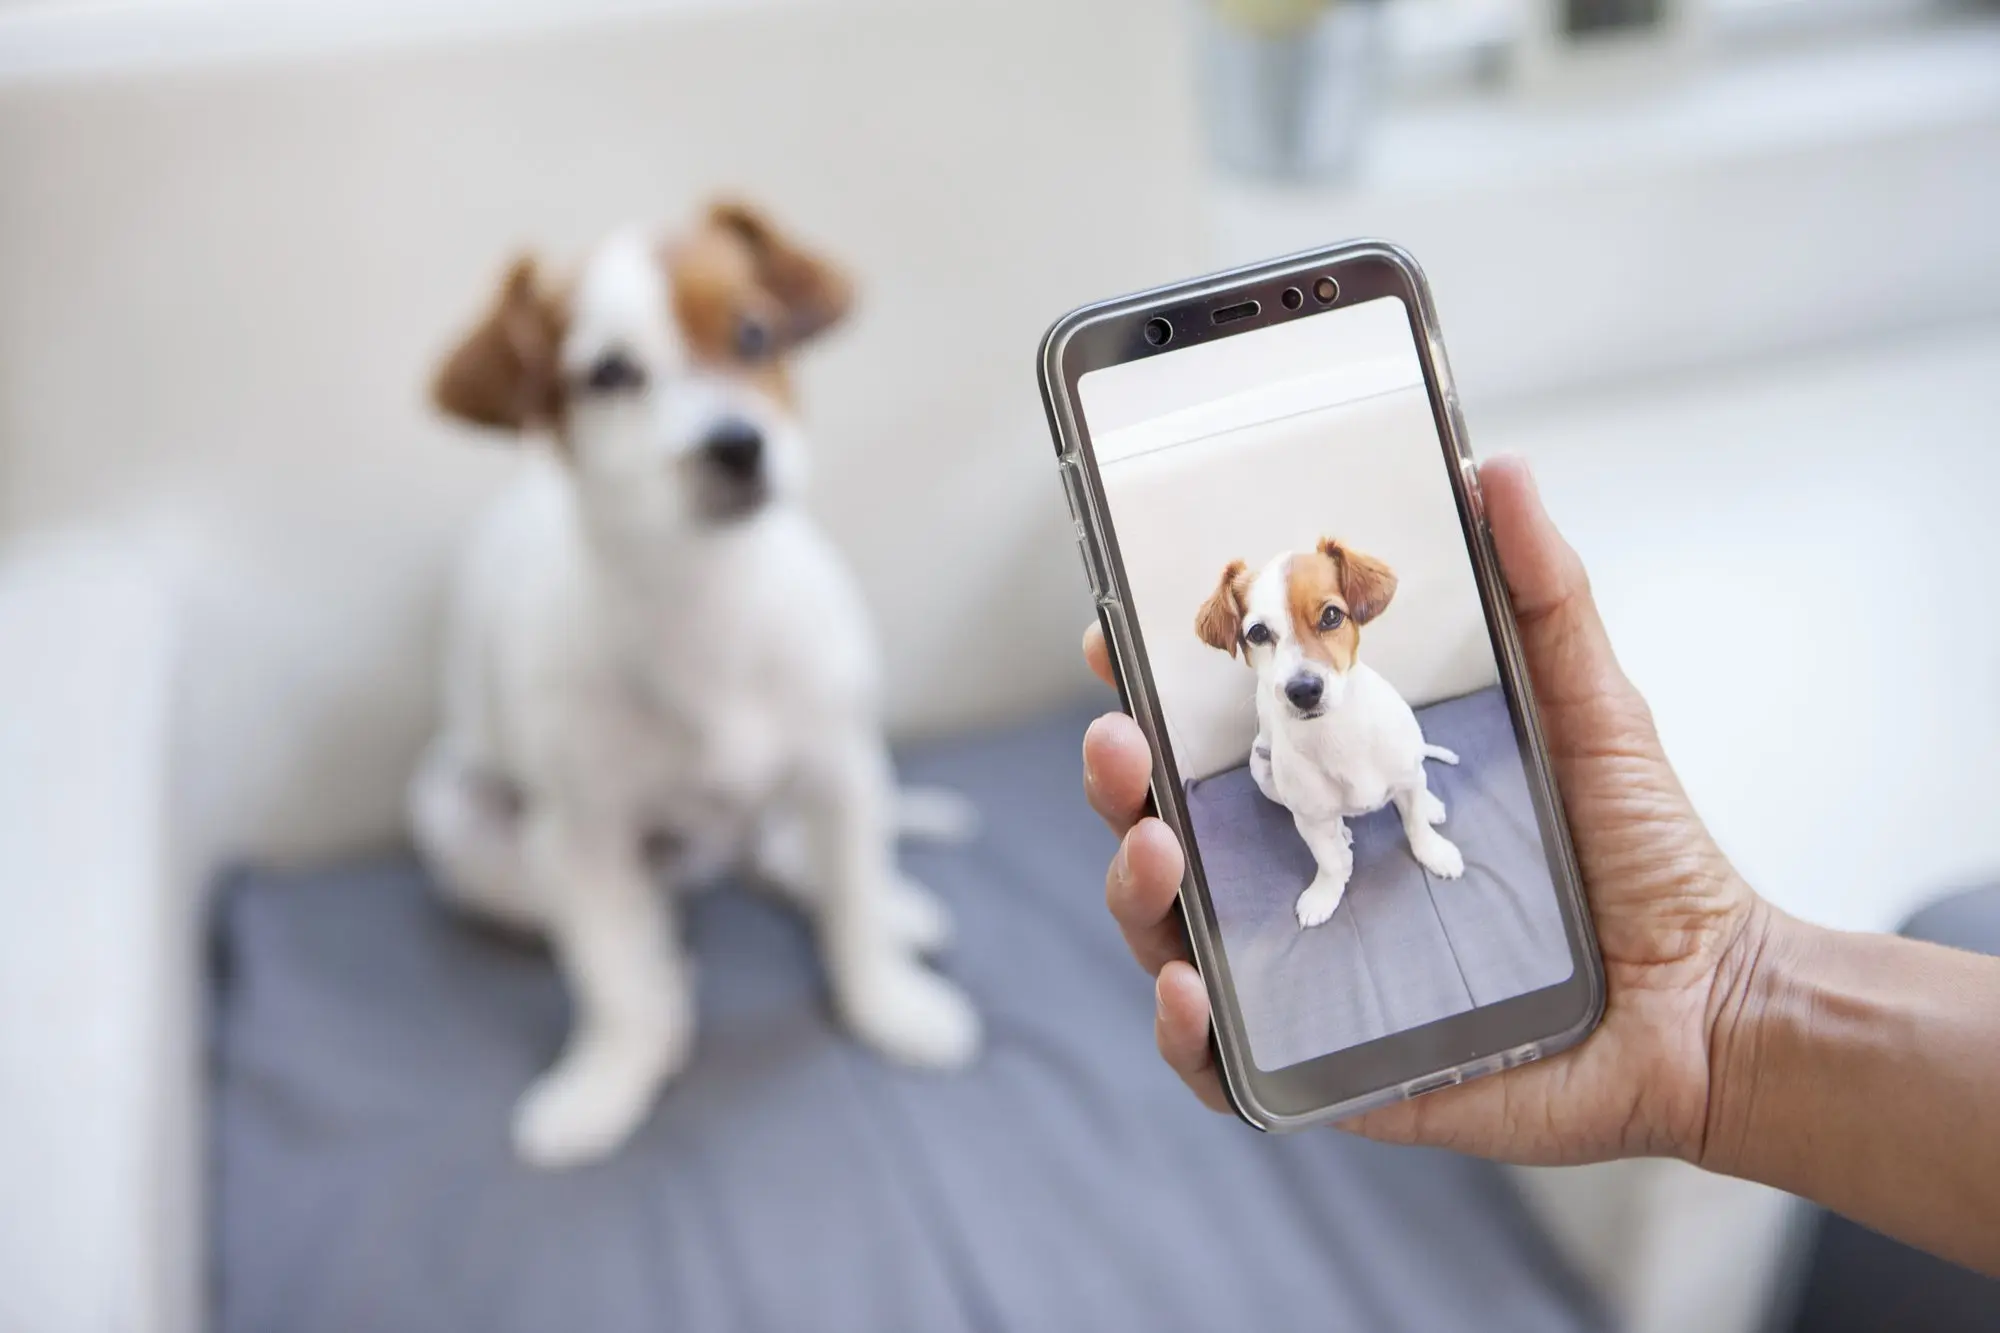 Photo of a dog being taken on a smartphone.